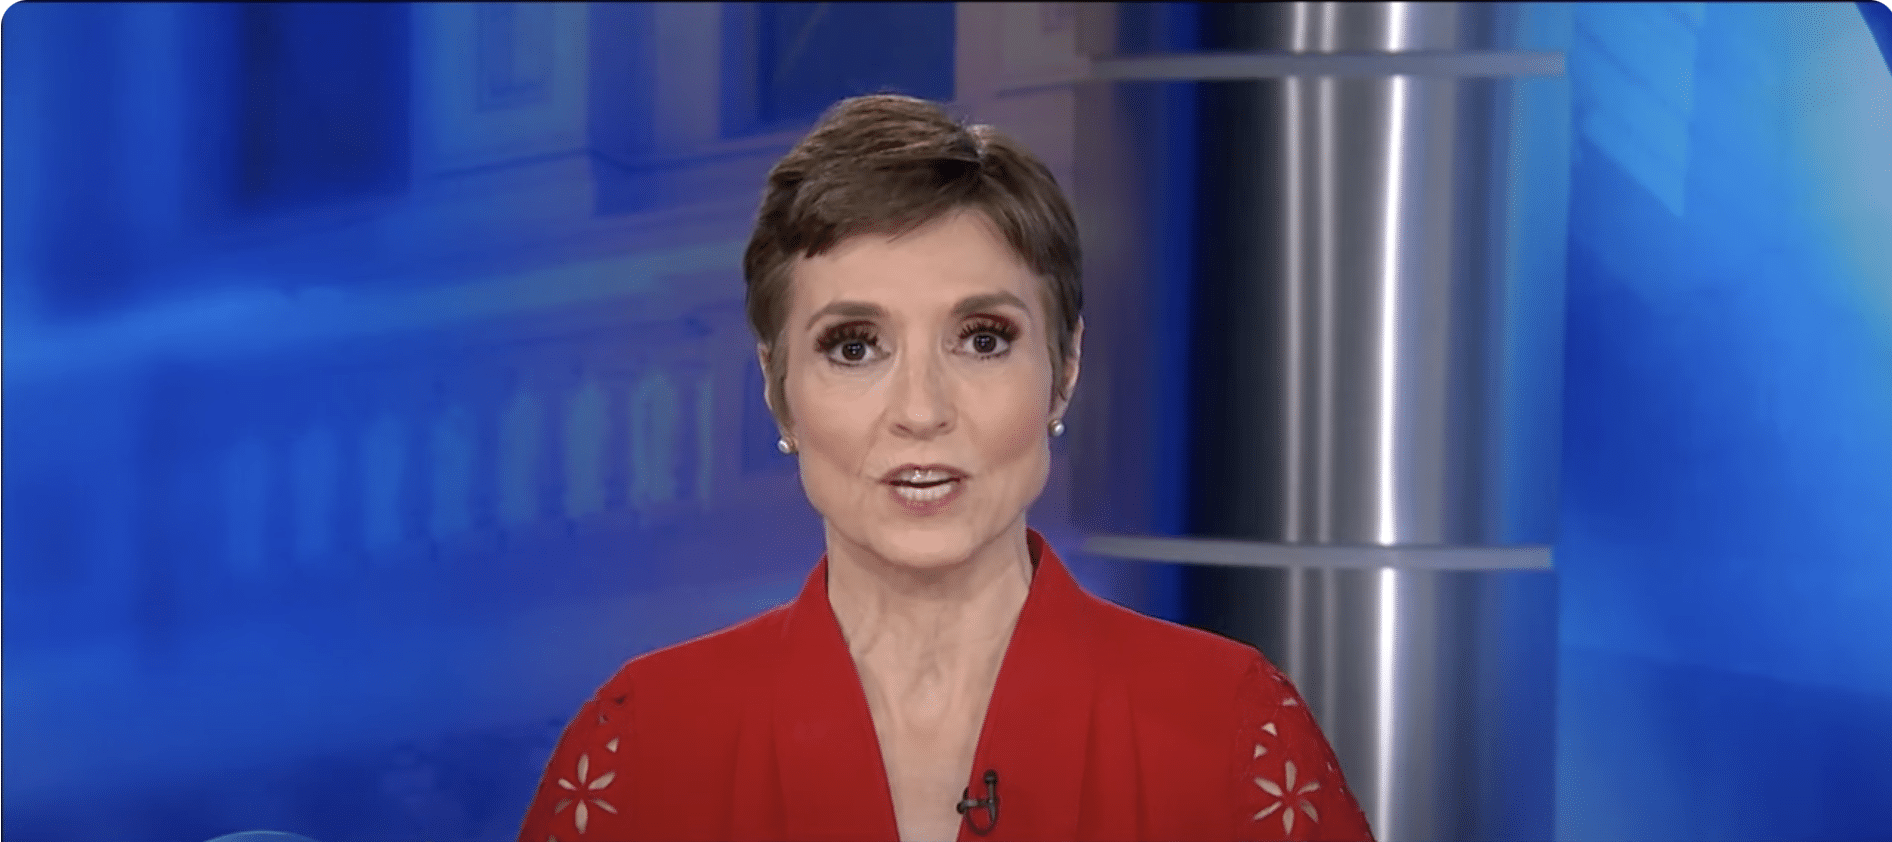 CBS News reportedly seized Catherine Herridge’s files and records after suddenly terminating her employment